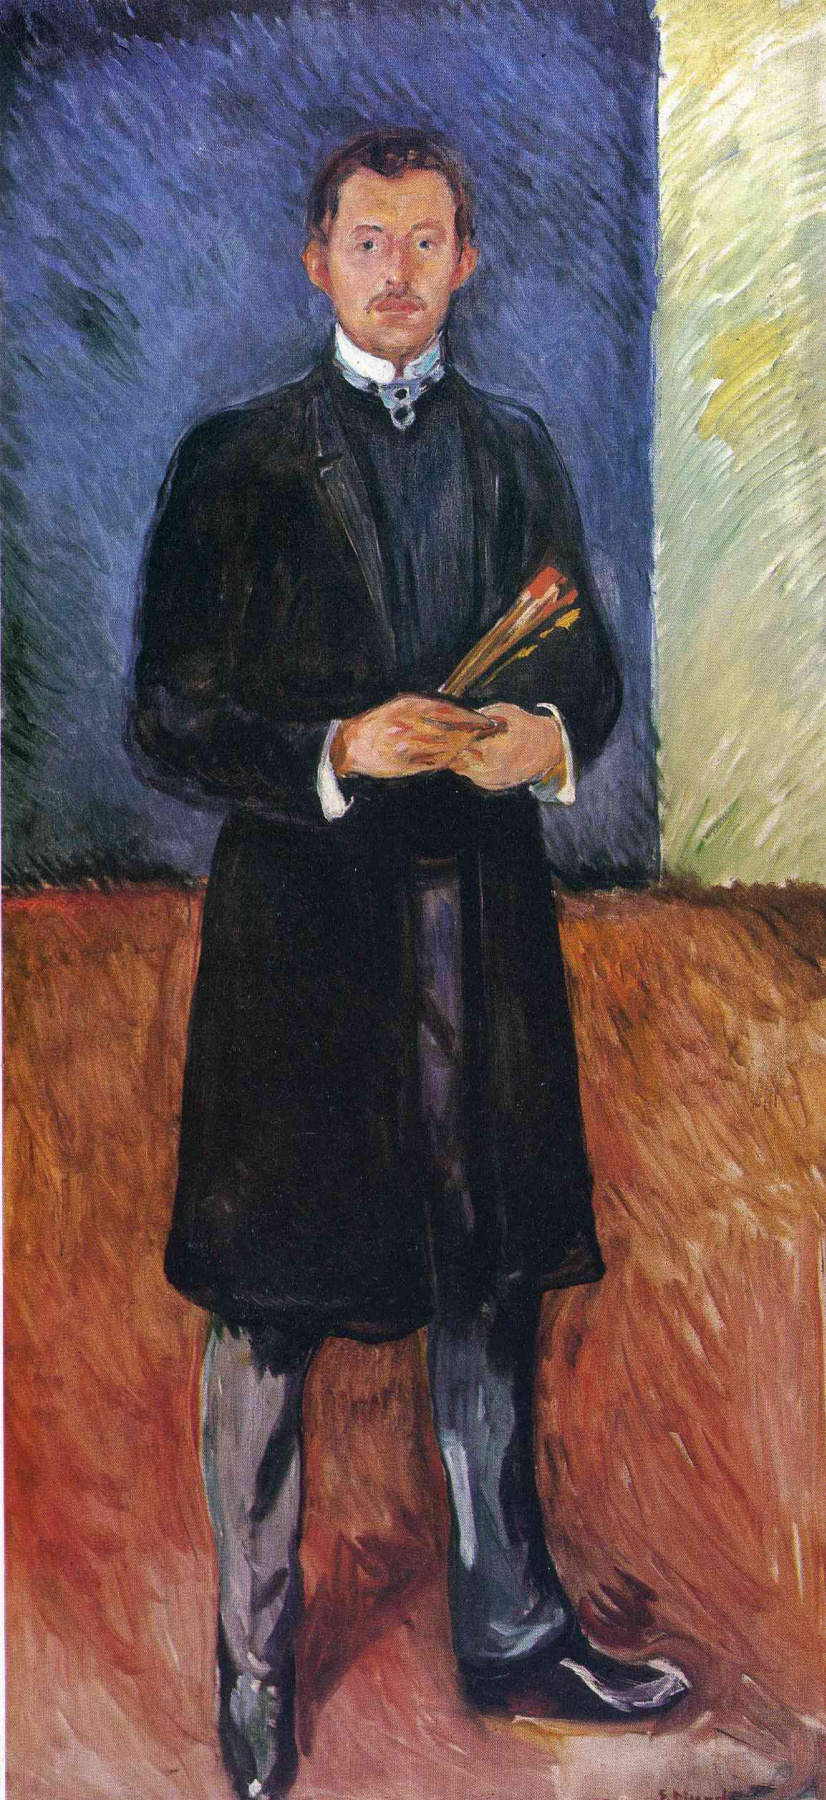 Edward Munch. Self-portrait with brushes